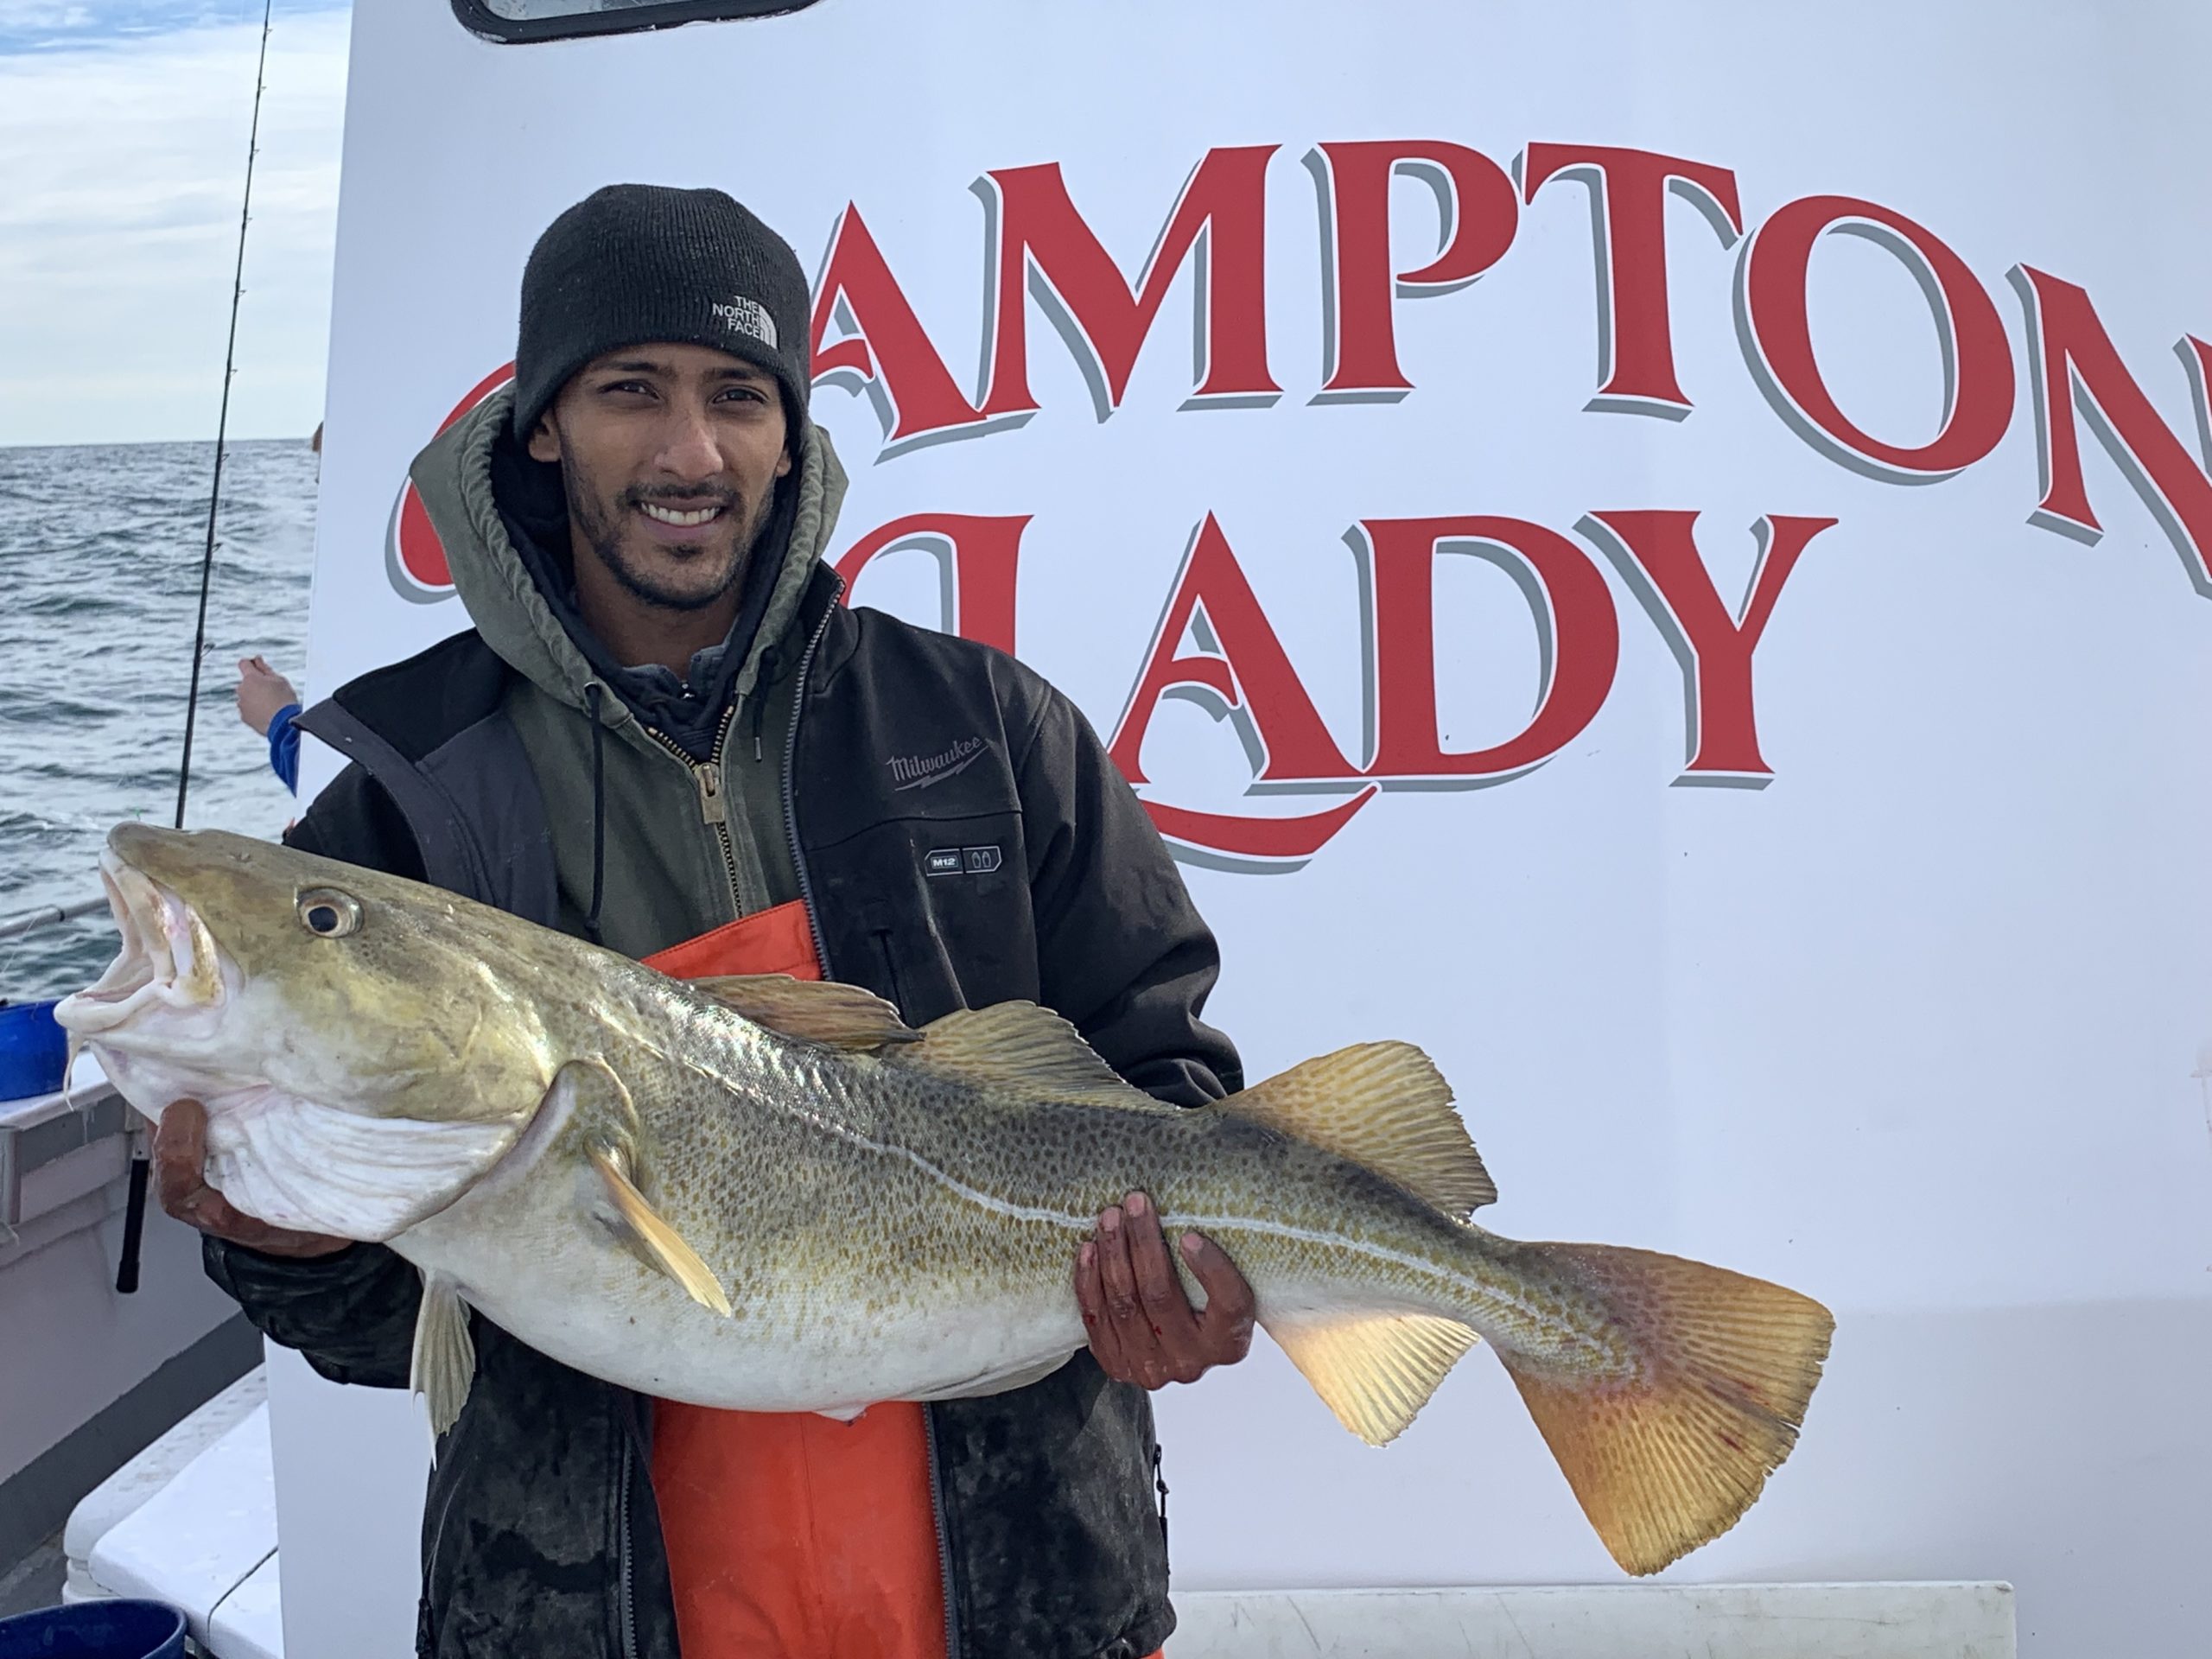 Sean Lochan boated this large codfish while fishing aboard the Hampton Lady last week.